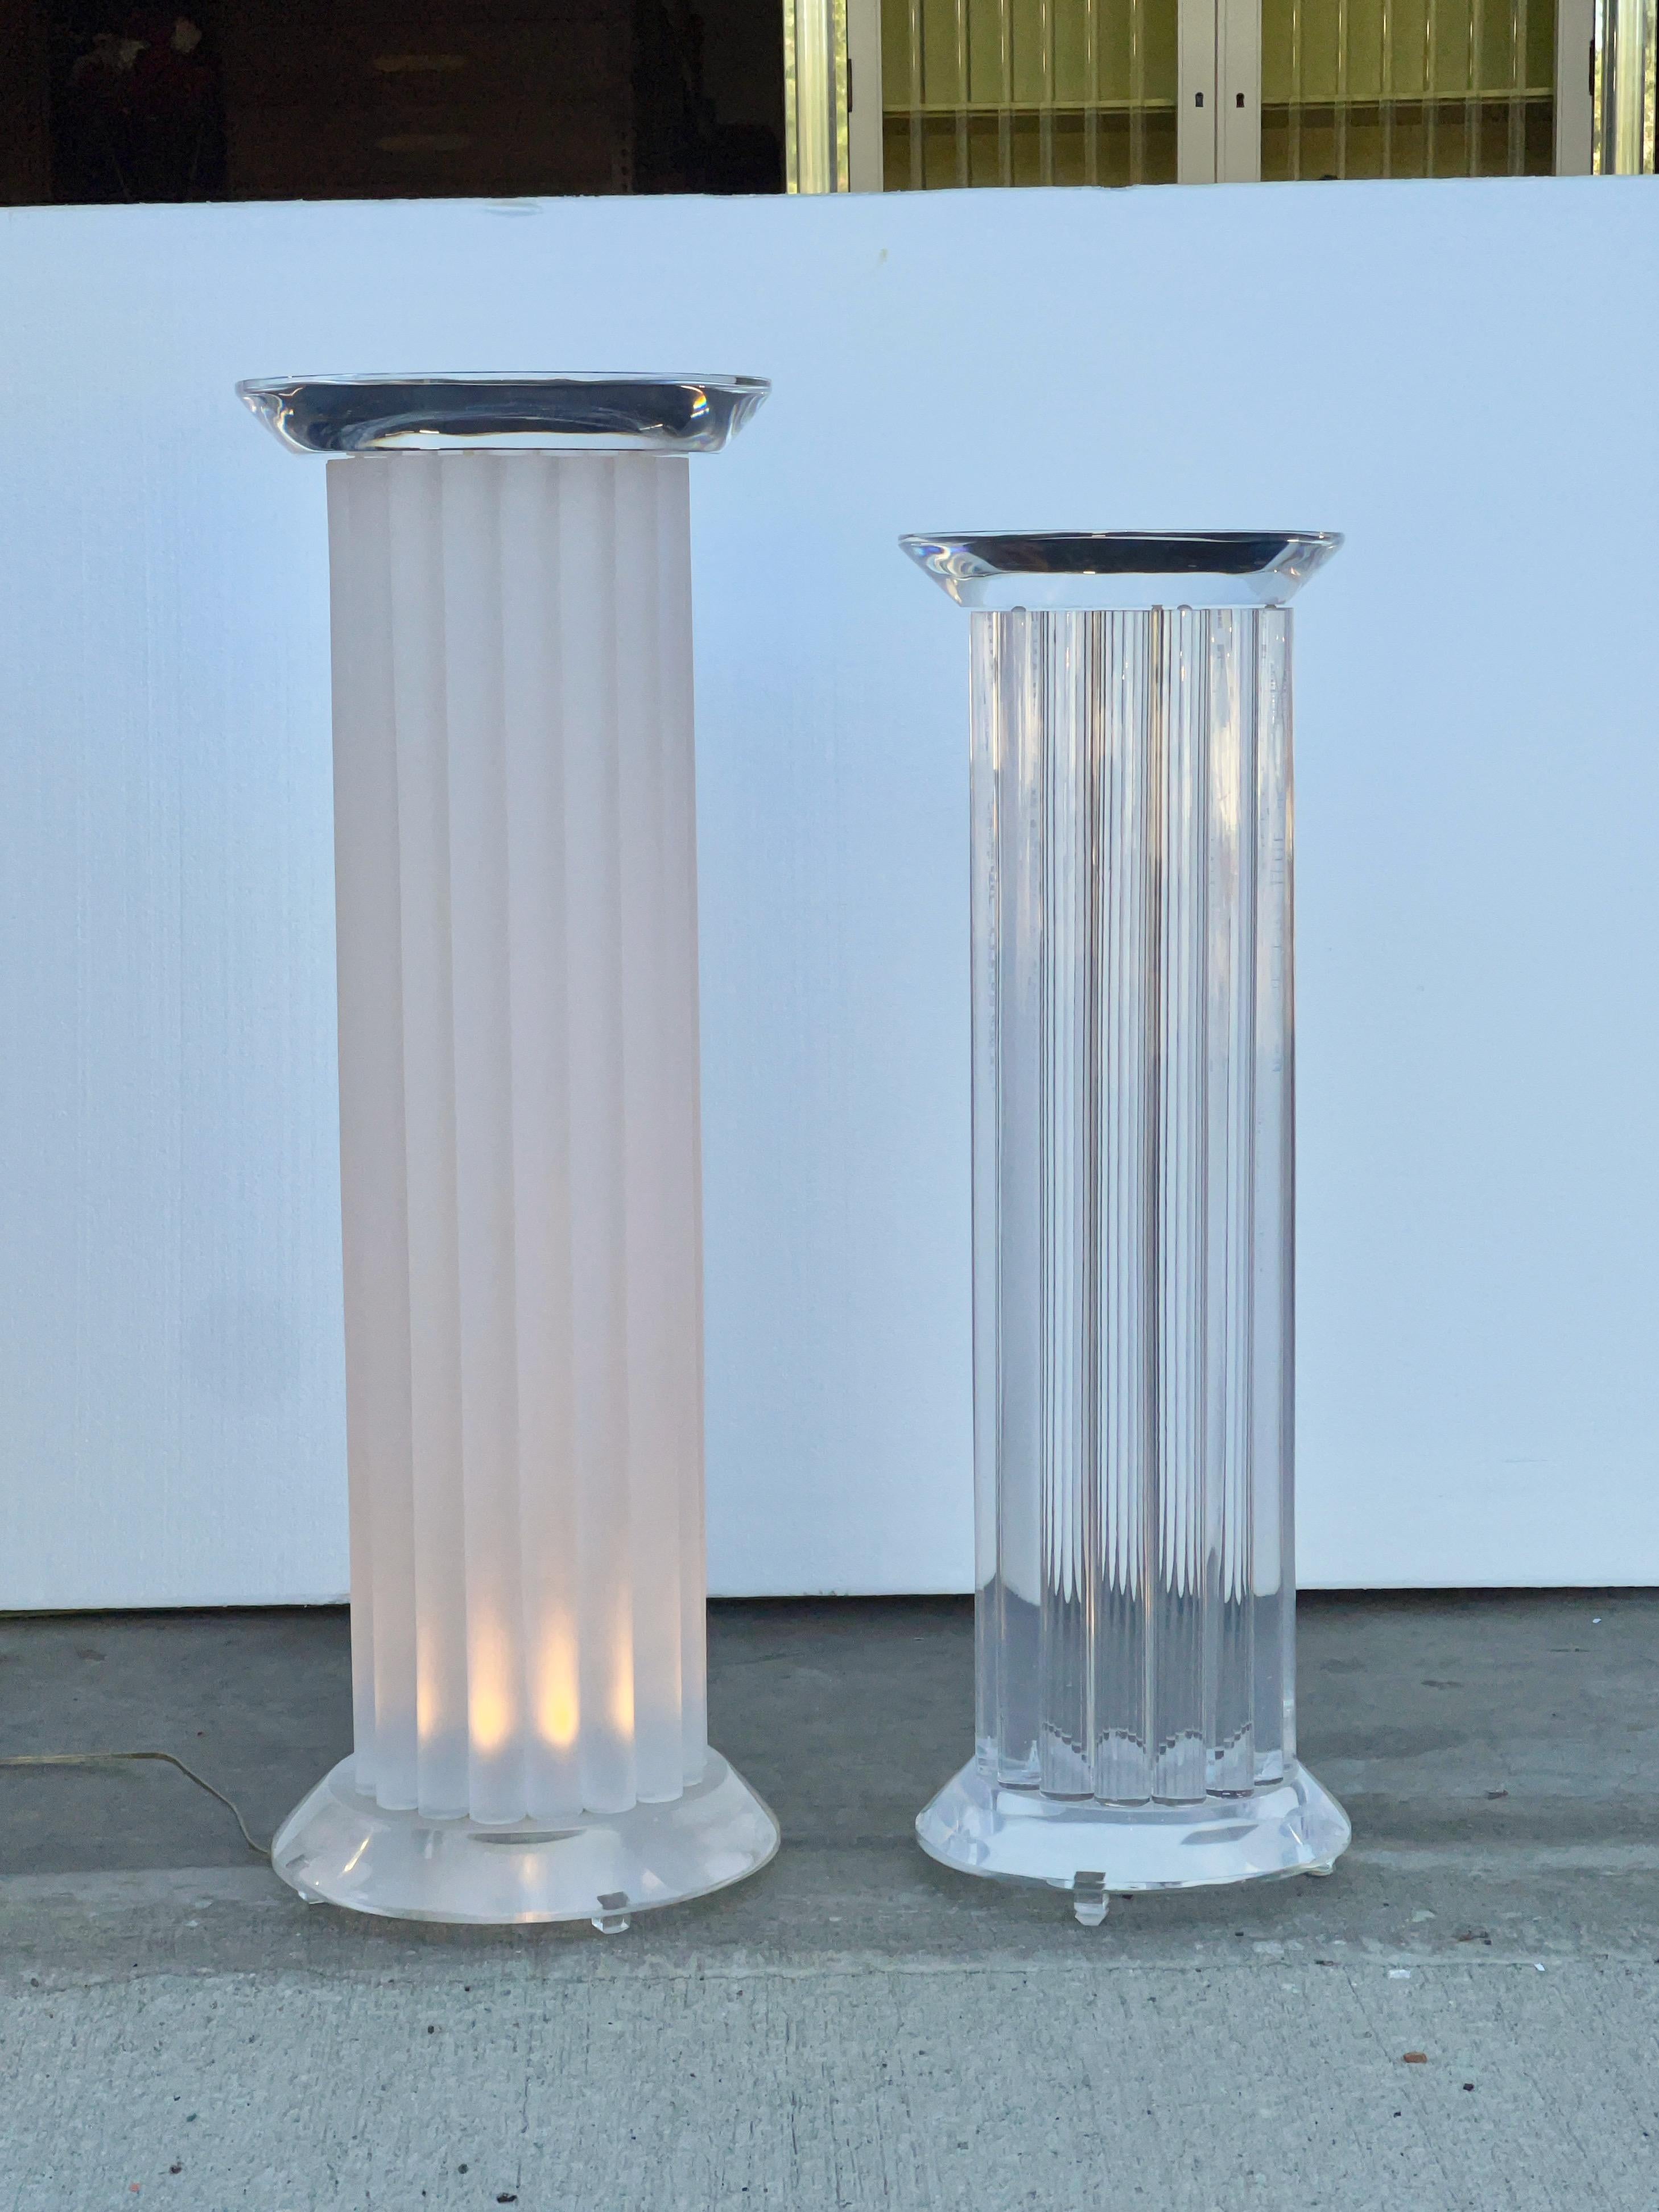 Two custom fabricated lucite pedestal columns both with ~2” thick lucite tops and bases with beveled edge.
The columns themselves are made up of 17 vertical round rods approx 1.5” diameter.
The taller is fitted with a lighting element in the base